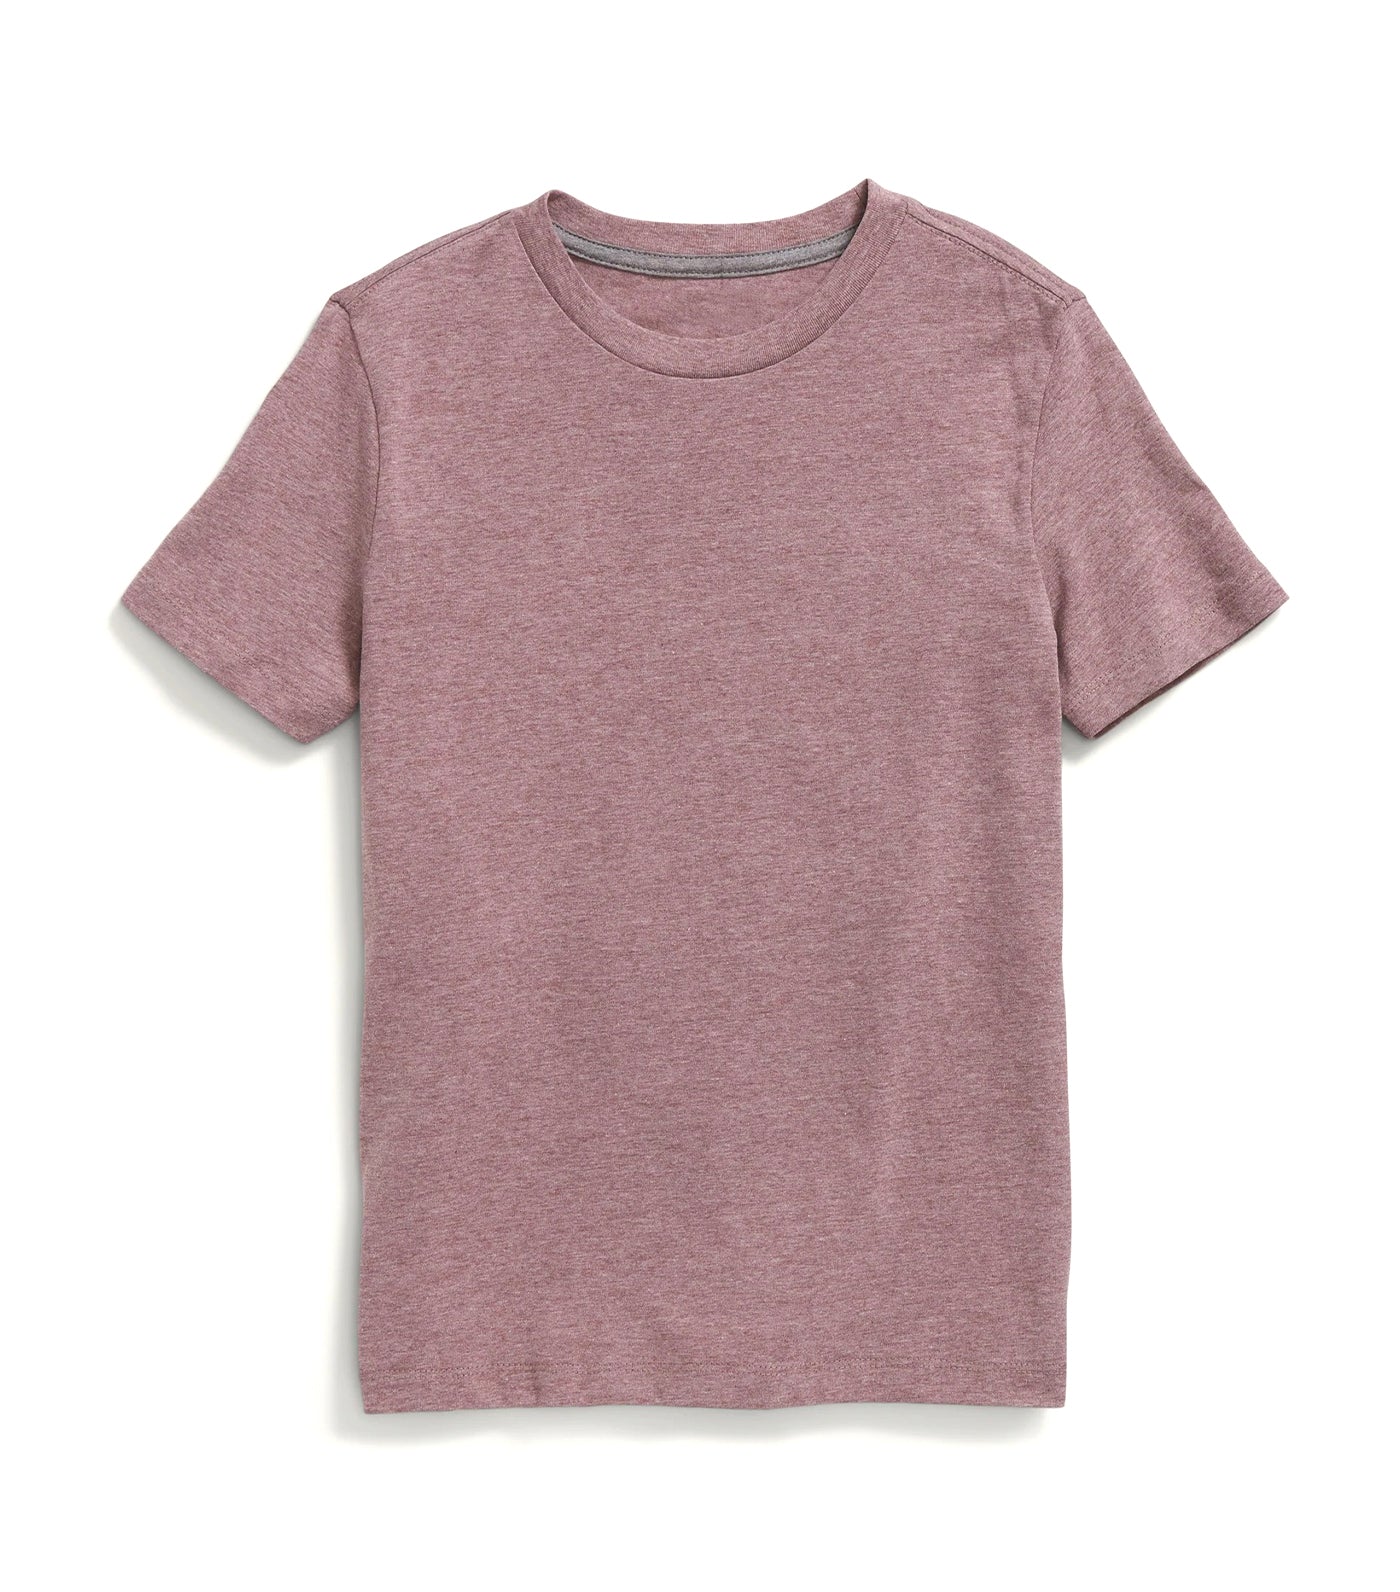 Softest Short-Sleeve Solid T-Shirt for Boys - Red Lacquer